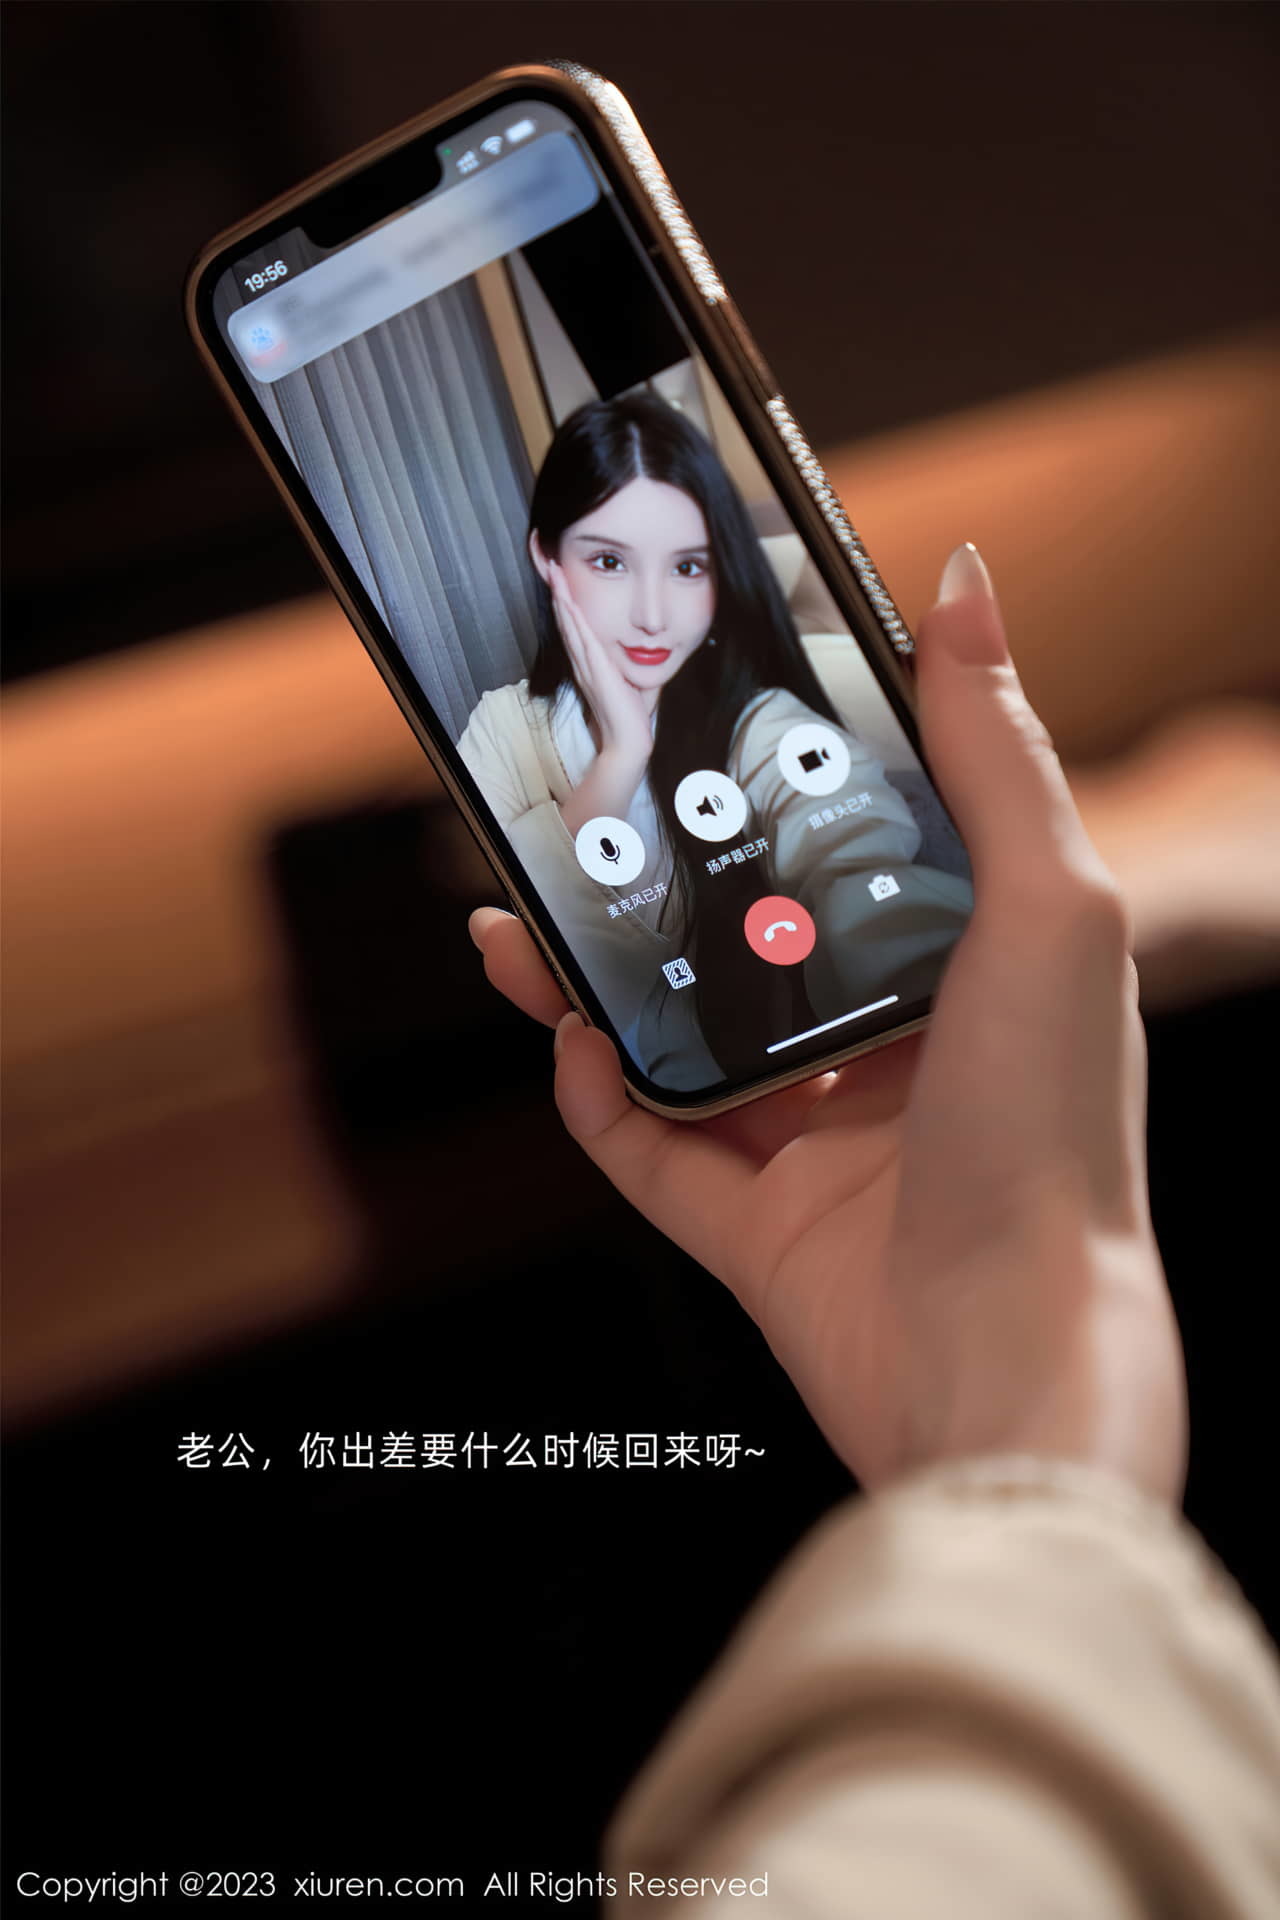 Goddess Zhou Yuxi's "Video Night with You" is full of infinite temptation and fantasy, allowing you to experience the excitement immersively